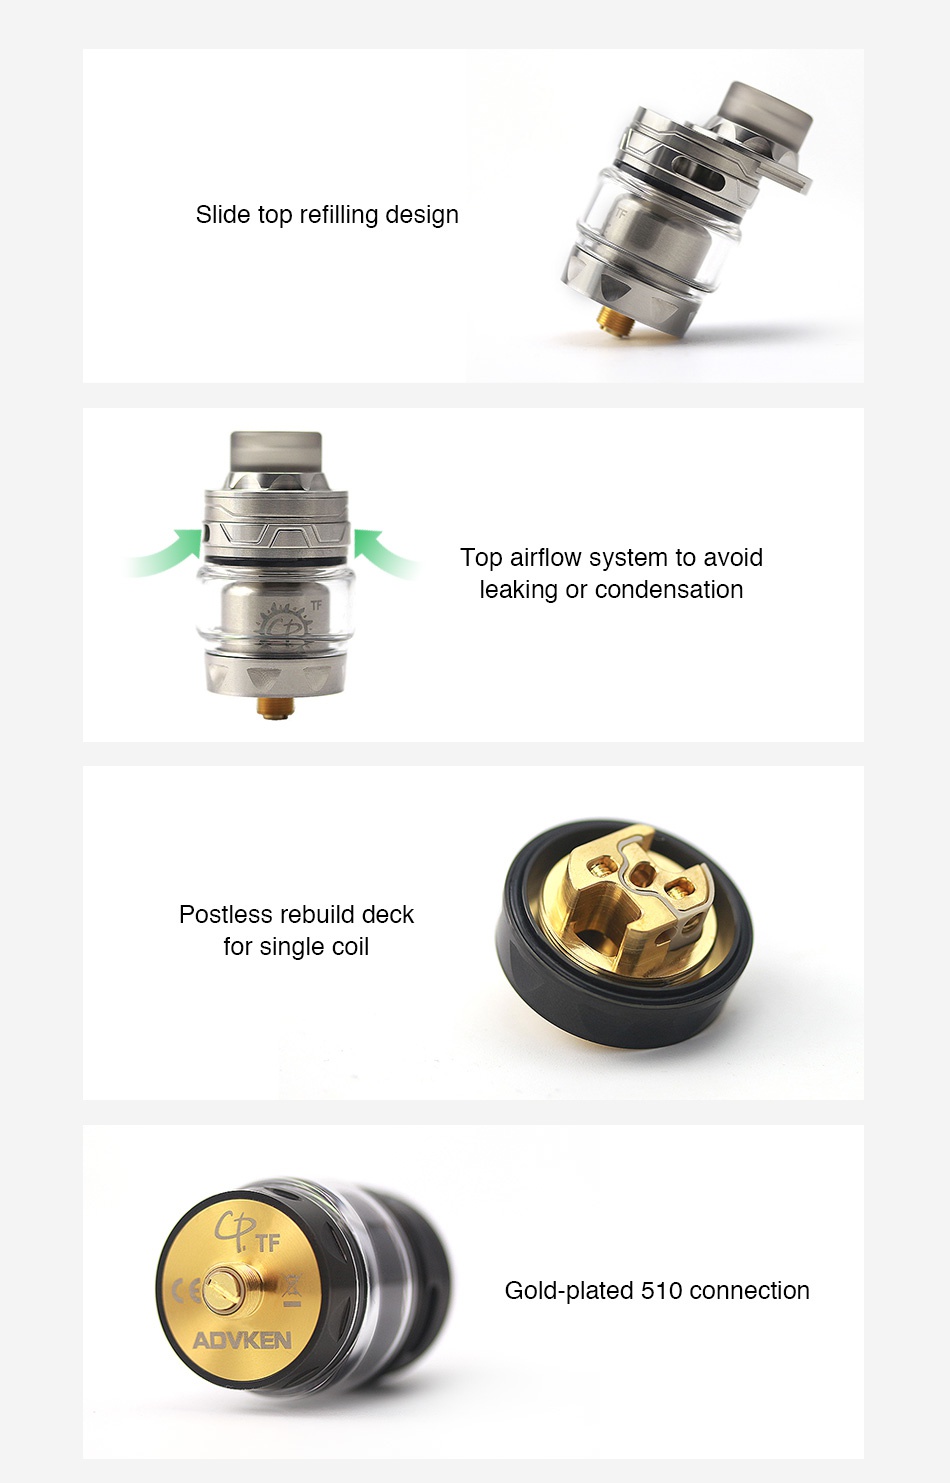 Advken CP TF RTA 4ml Slide top refilling design Top airflow system to avoid leaking or condensation Postless rebuild deck for single coil Gold plated 510 connection ADVKEN